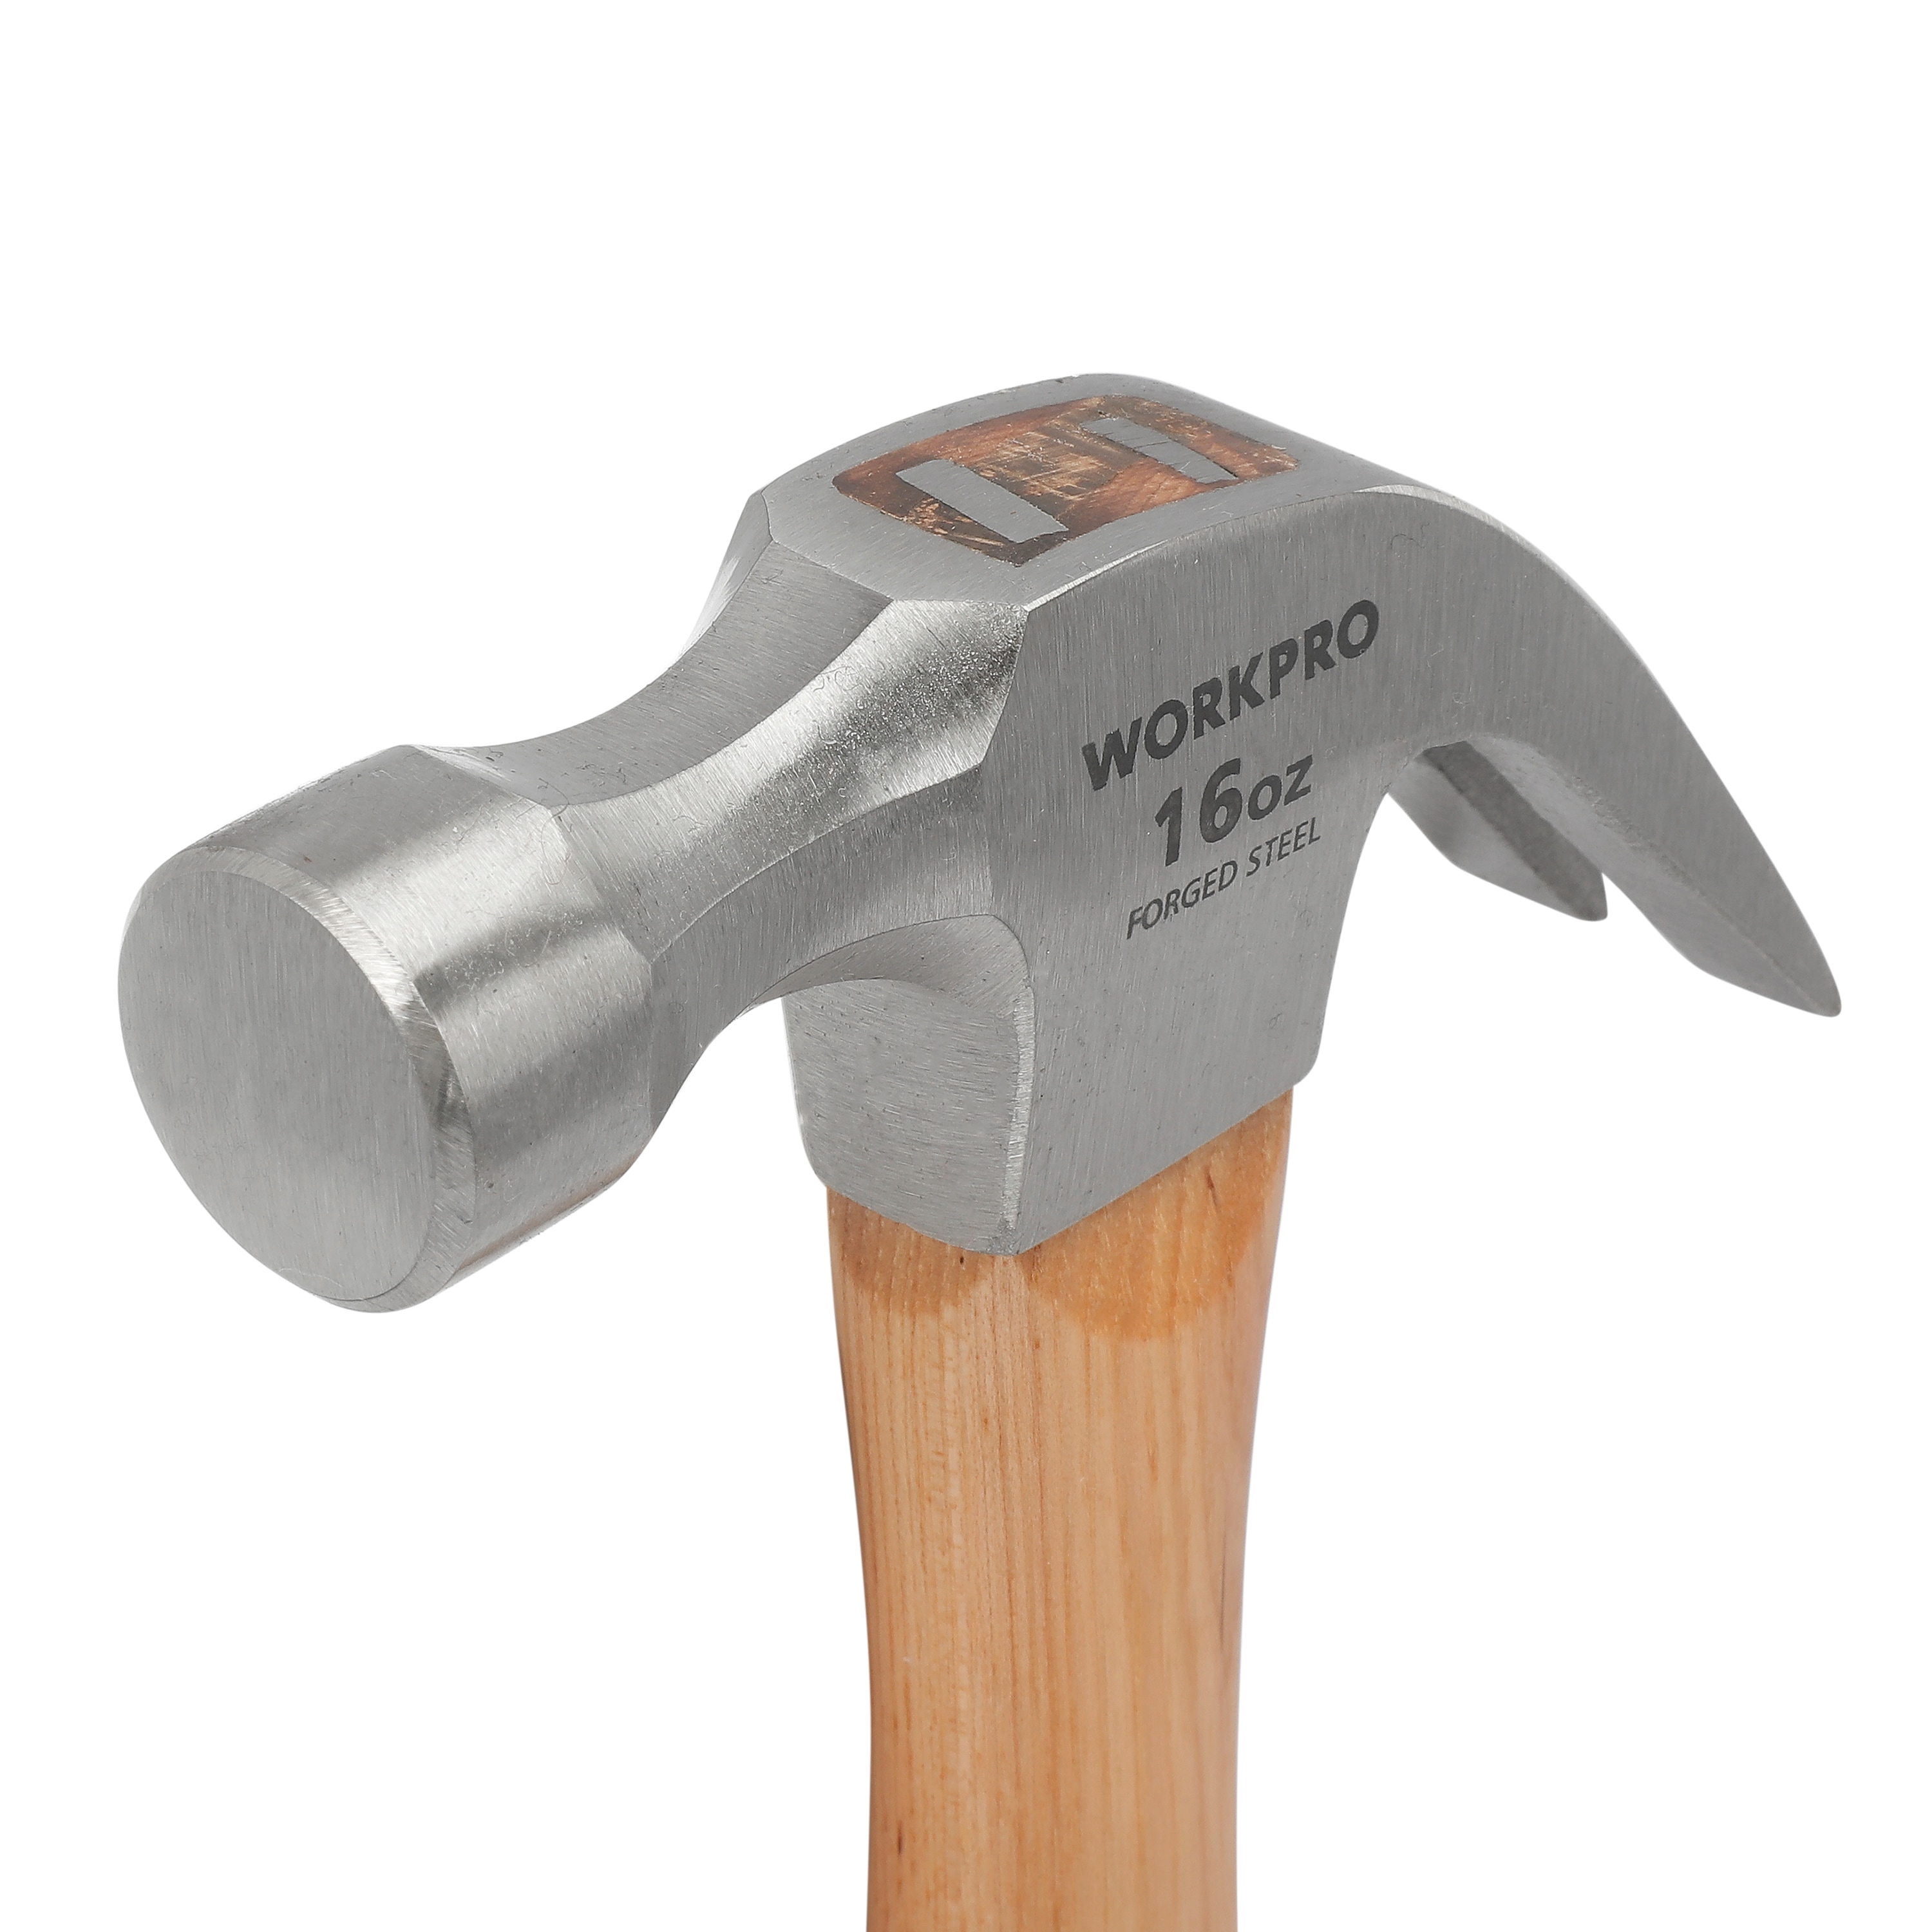 WORKPRO 16-oz Smooth Face Steel Head Wood Claw Hammer in the